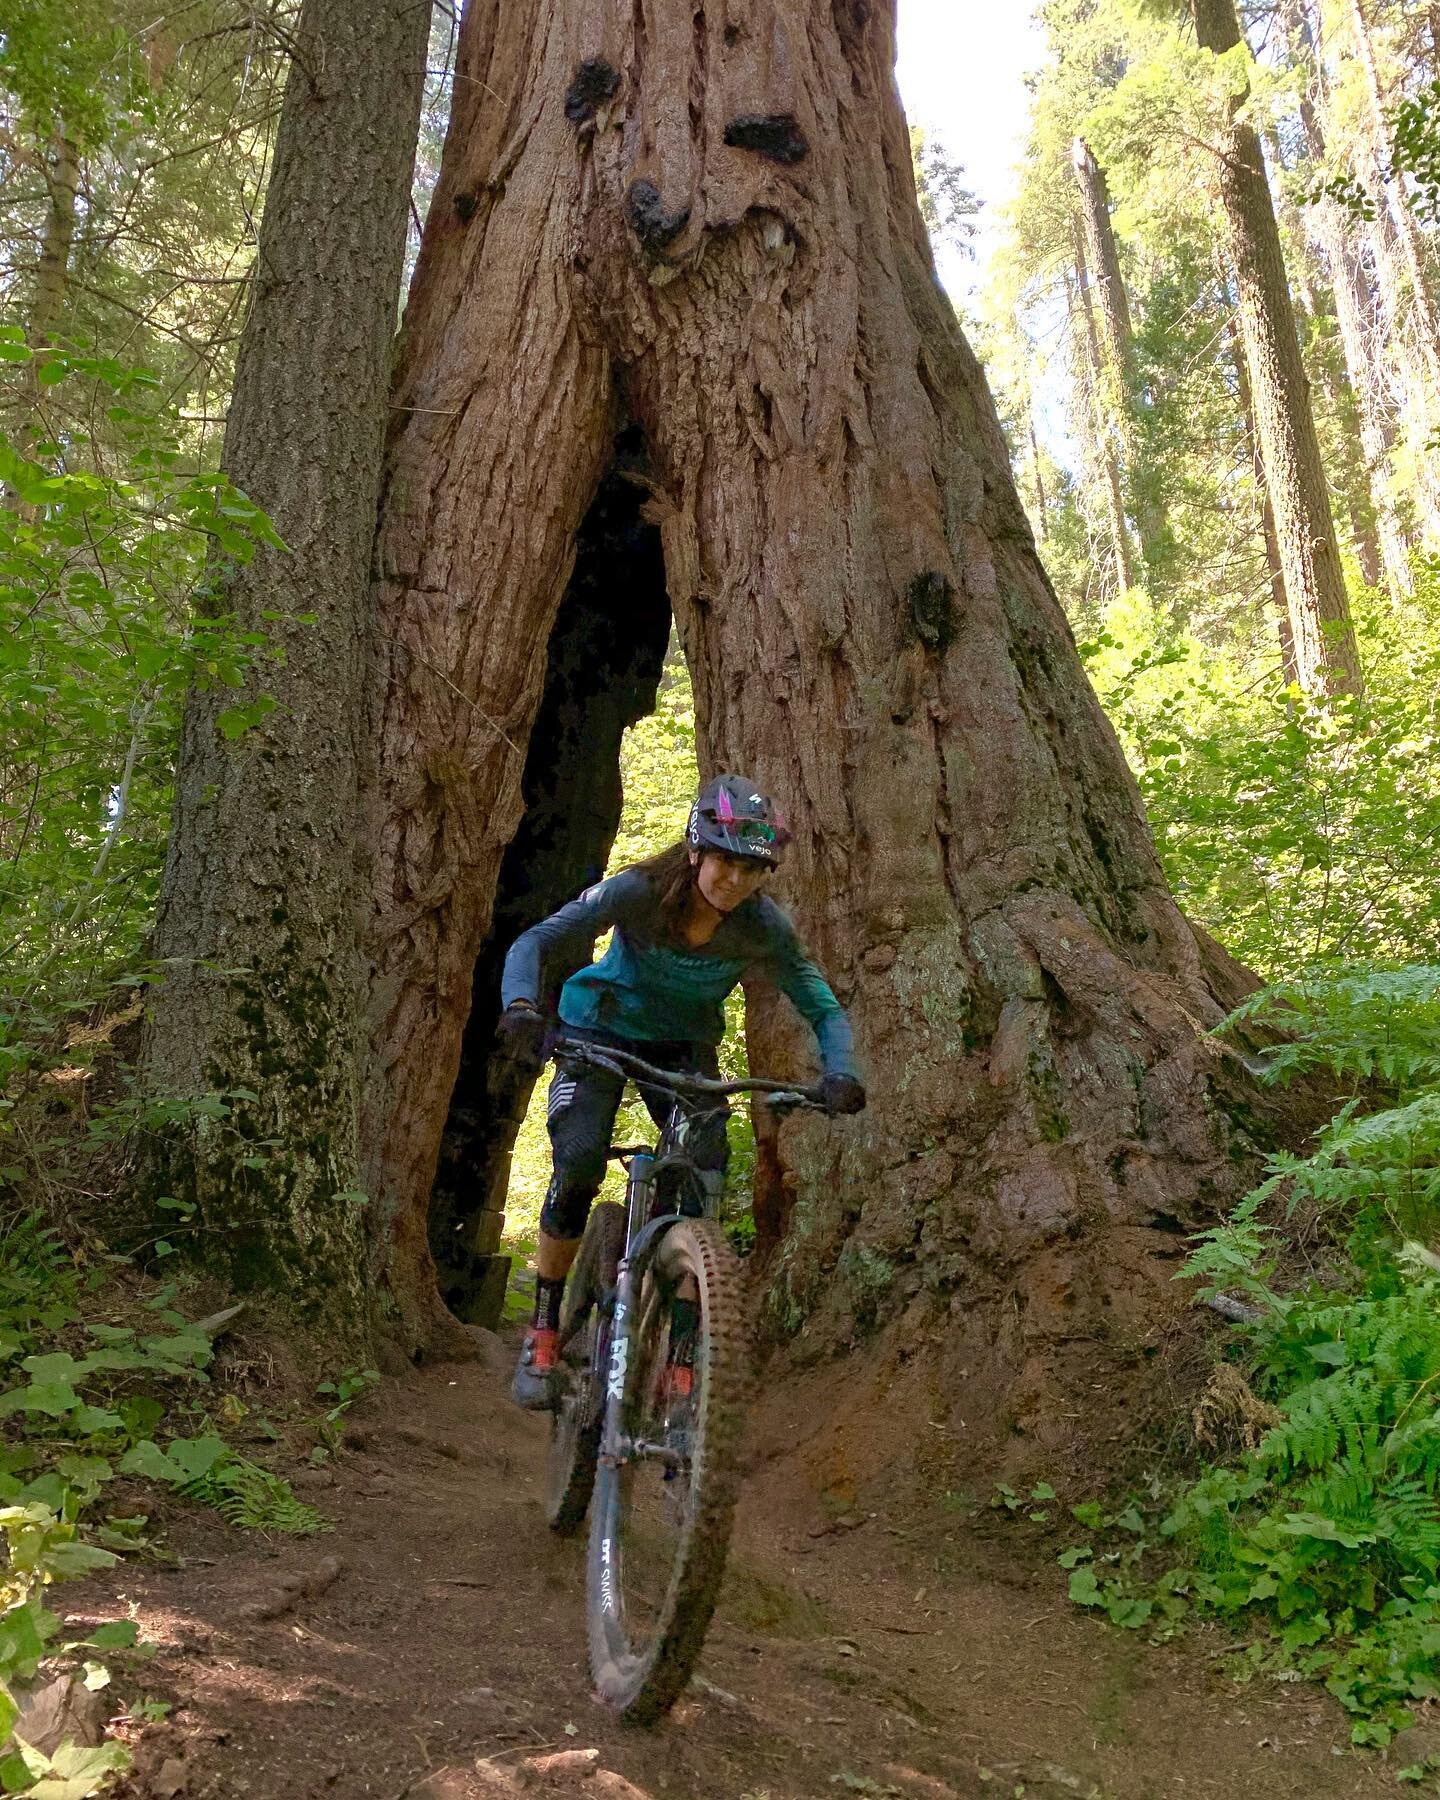 Miss having my wheels in the dirt!. 
#fbf to my last trip somewhere deep in the Sequoia National Park 🌲💚. Wishing everyone a great weekend. Please pop a wheelie for me :) #mtblife #enduro #optoutside